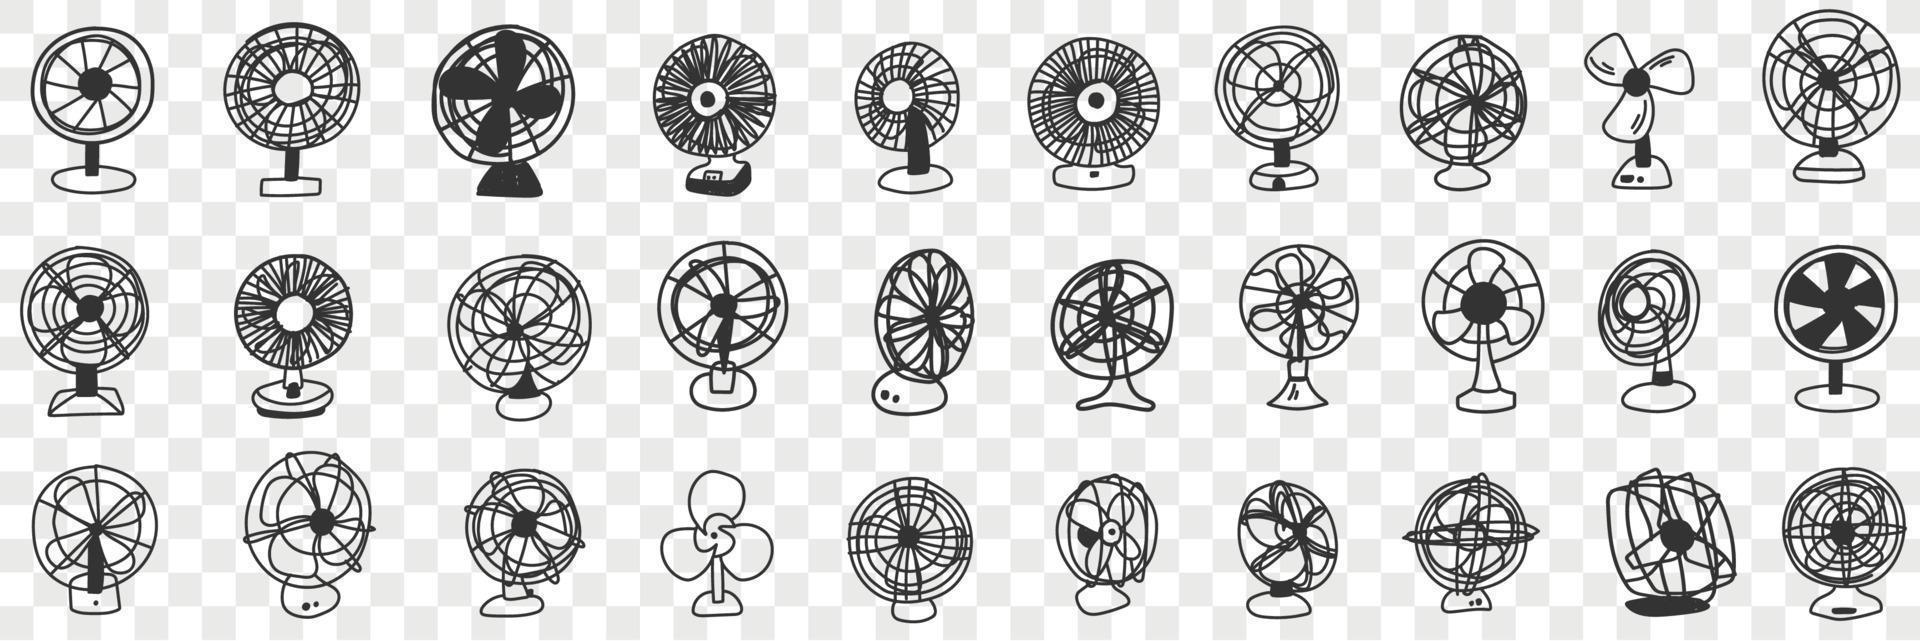 Different blowing fans doodle set. Collection of hand drawn various fans for blowing air and air conditioning in rows isolated on transparent background vector